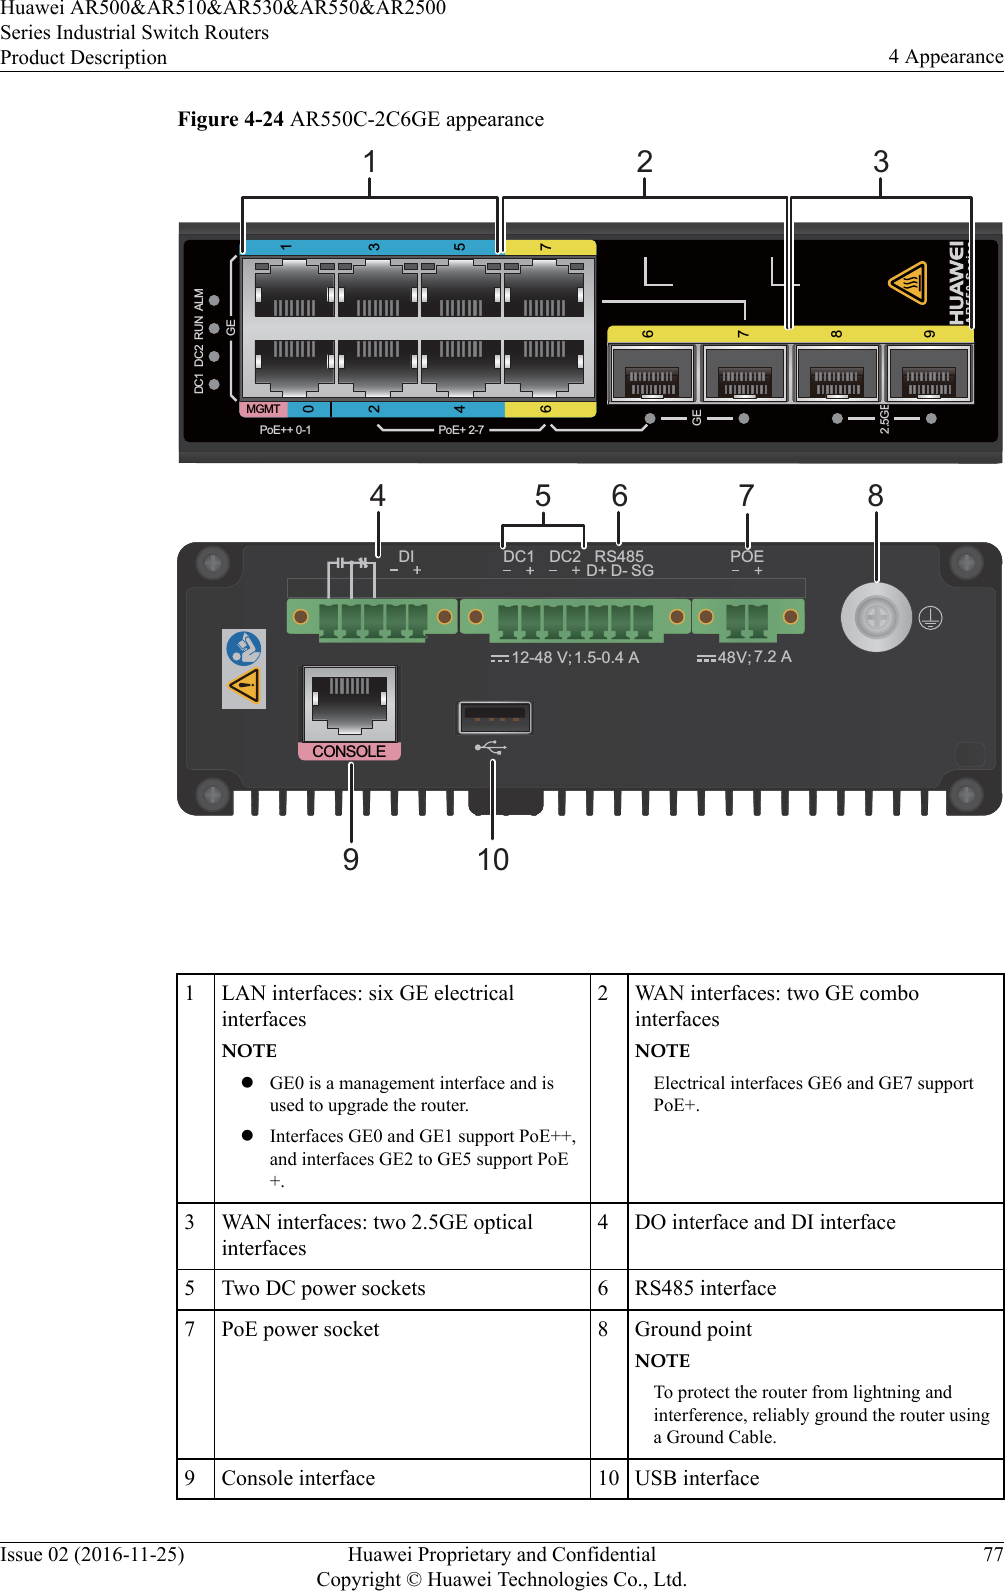 Figure 4-24 AR550C-2C6GE appearance0MGMT12345667897DC1 DC2 RUN ALM2.5GEGEPoE+ 2-7PoE++ 0-1GE1 2 3RS485 POEDC1 DC2 D+ D- SGCONSOLE12-48 V; 1.5-0.4 A 48 V; 7.2 ADI91045678 1LAN interfaces: six GE electricalinterfacesNOTElGE0 is a management interface and isused to upgrade the router.lInterfaces GE0 and GE1 support PoE++,and interfaces GE2 to GE5 support PoE+.2 WAN interfaces: two GE combointerfacesNOTEElectrical interfaces GE6 and GE7 supportPoE+.3 WAN interfaces: two 2.5GE opticalinterfaces4 DO interface and DI interface5 Two DC power sockets 6 RS485 interface7 PoE power socket 8 Ground pointNOTETo protect the router from lightning andinterference, reliably ground the router usinga Ground Cable.9 Console interface 10 USB interfaceHuawei AR500&amp;AR510&amp;AR530&amp;AR550&amp;AR2500Series Industrial Switch RoutersProduct Description 4 AppearanceIssue 02 (2016-11-25) Huawei Proprietary and ConfidentialCopyright © Huawei Technologies Co., Ltd.77